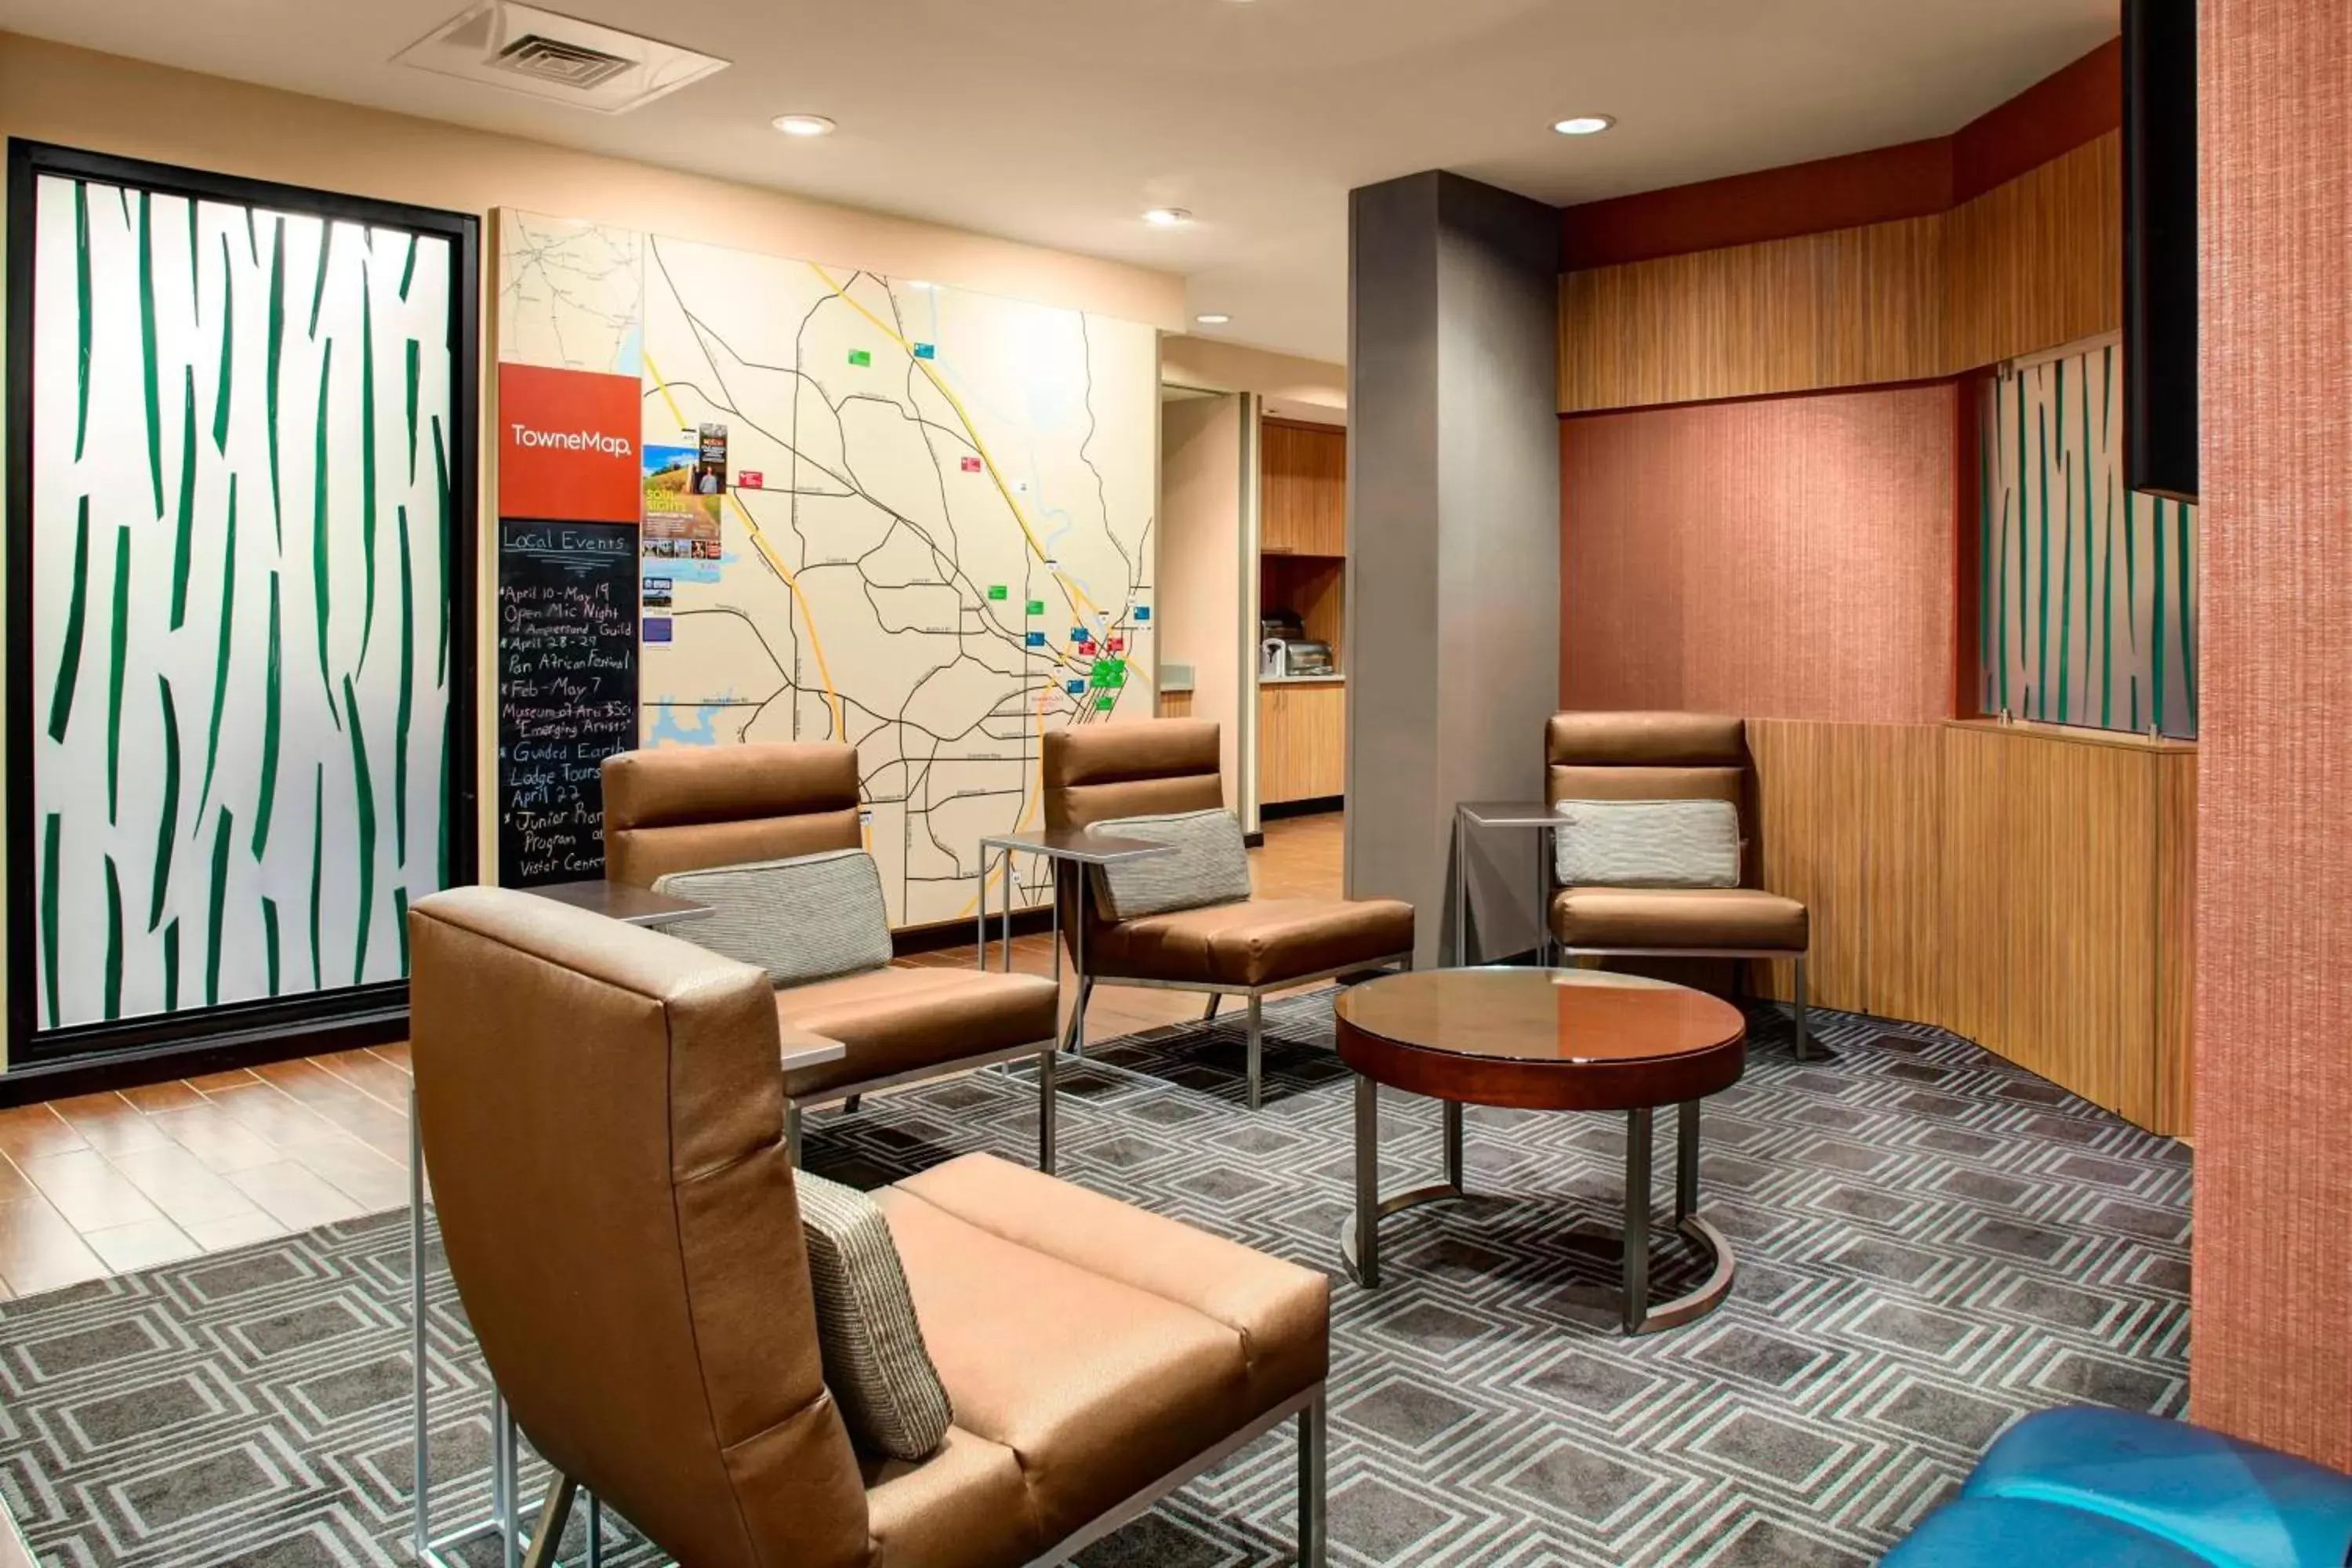 Location in TownePlace Suites by Marriott Macon Mercer University